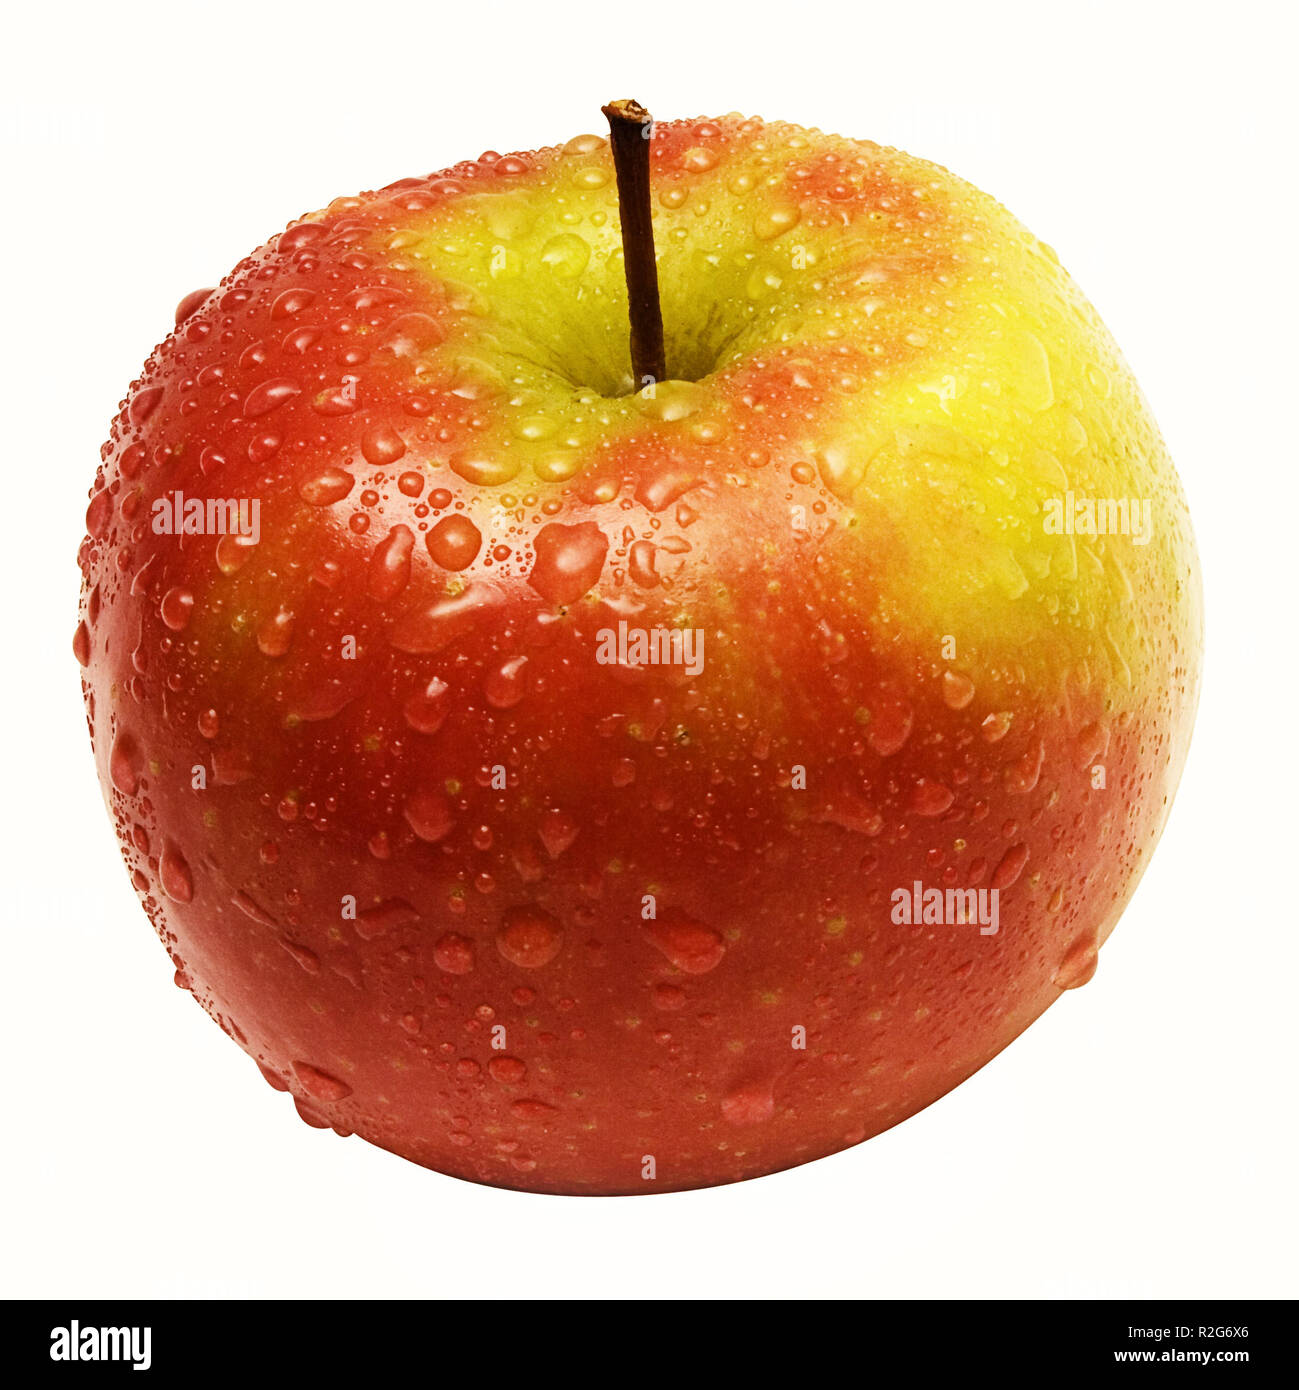 wet apple with pruning path ii Stock Photo